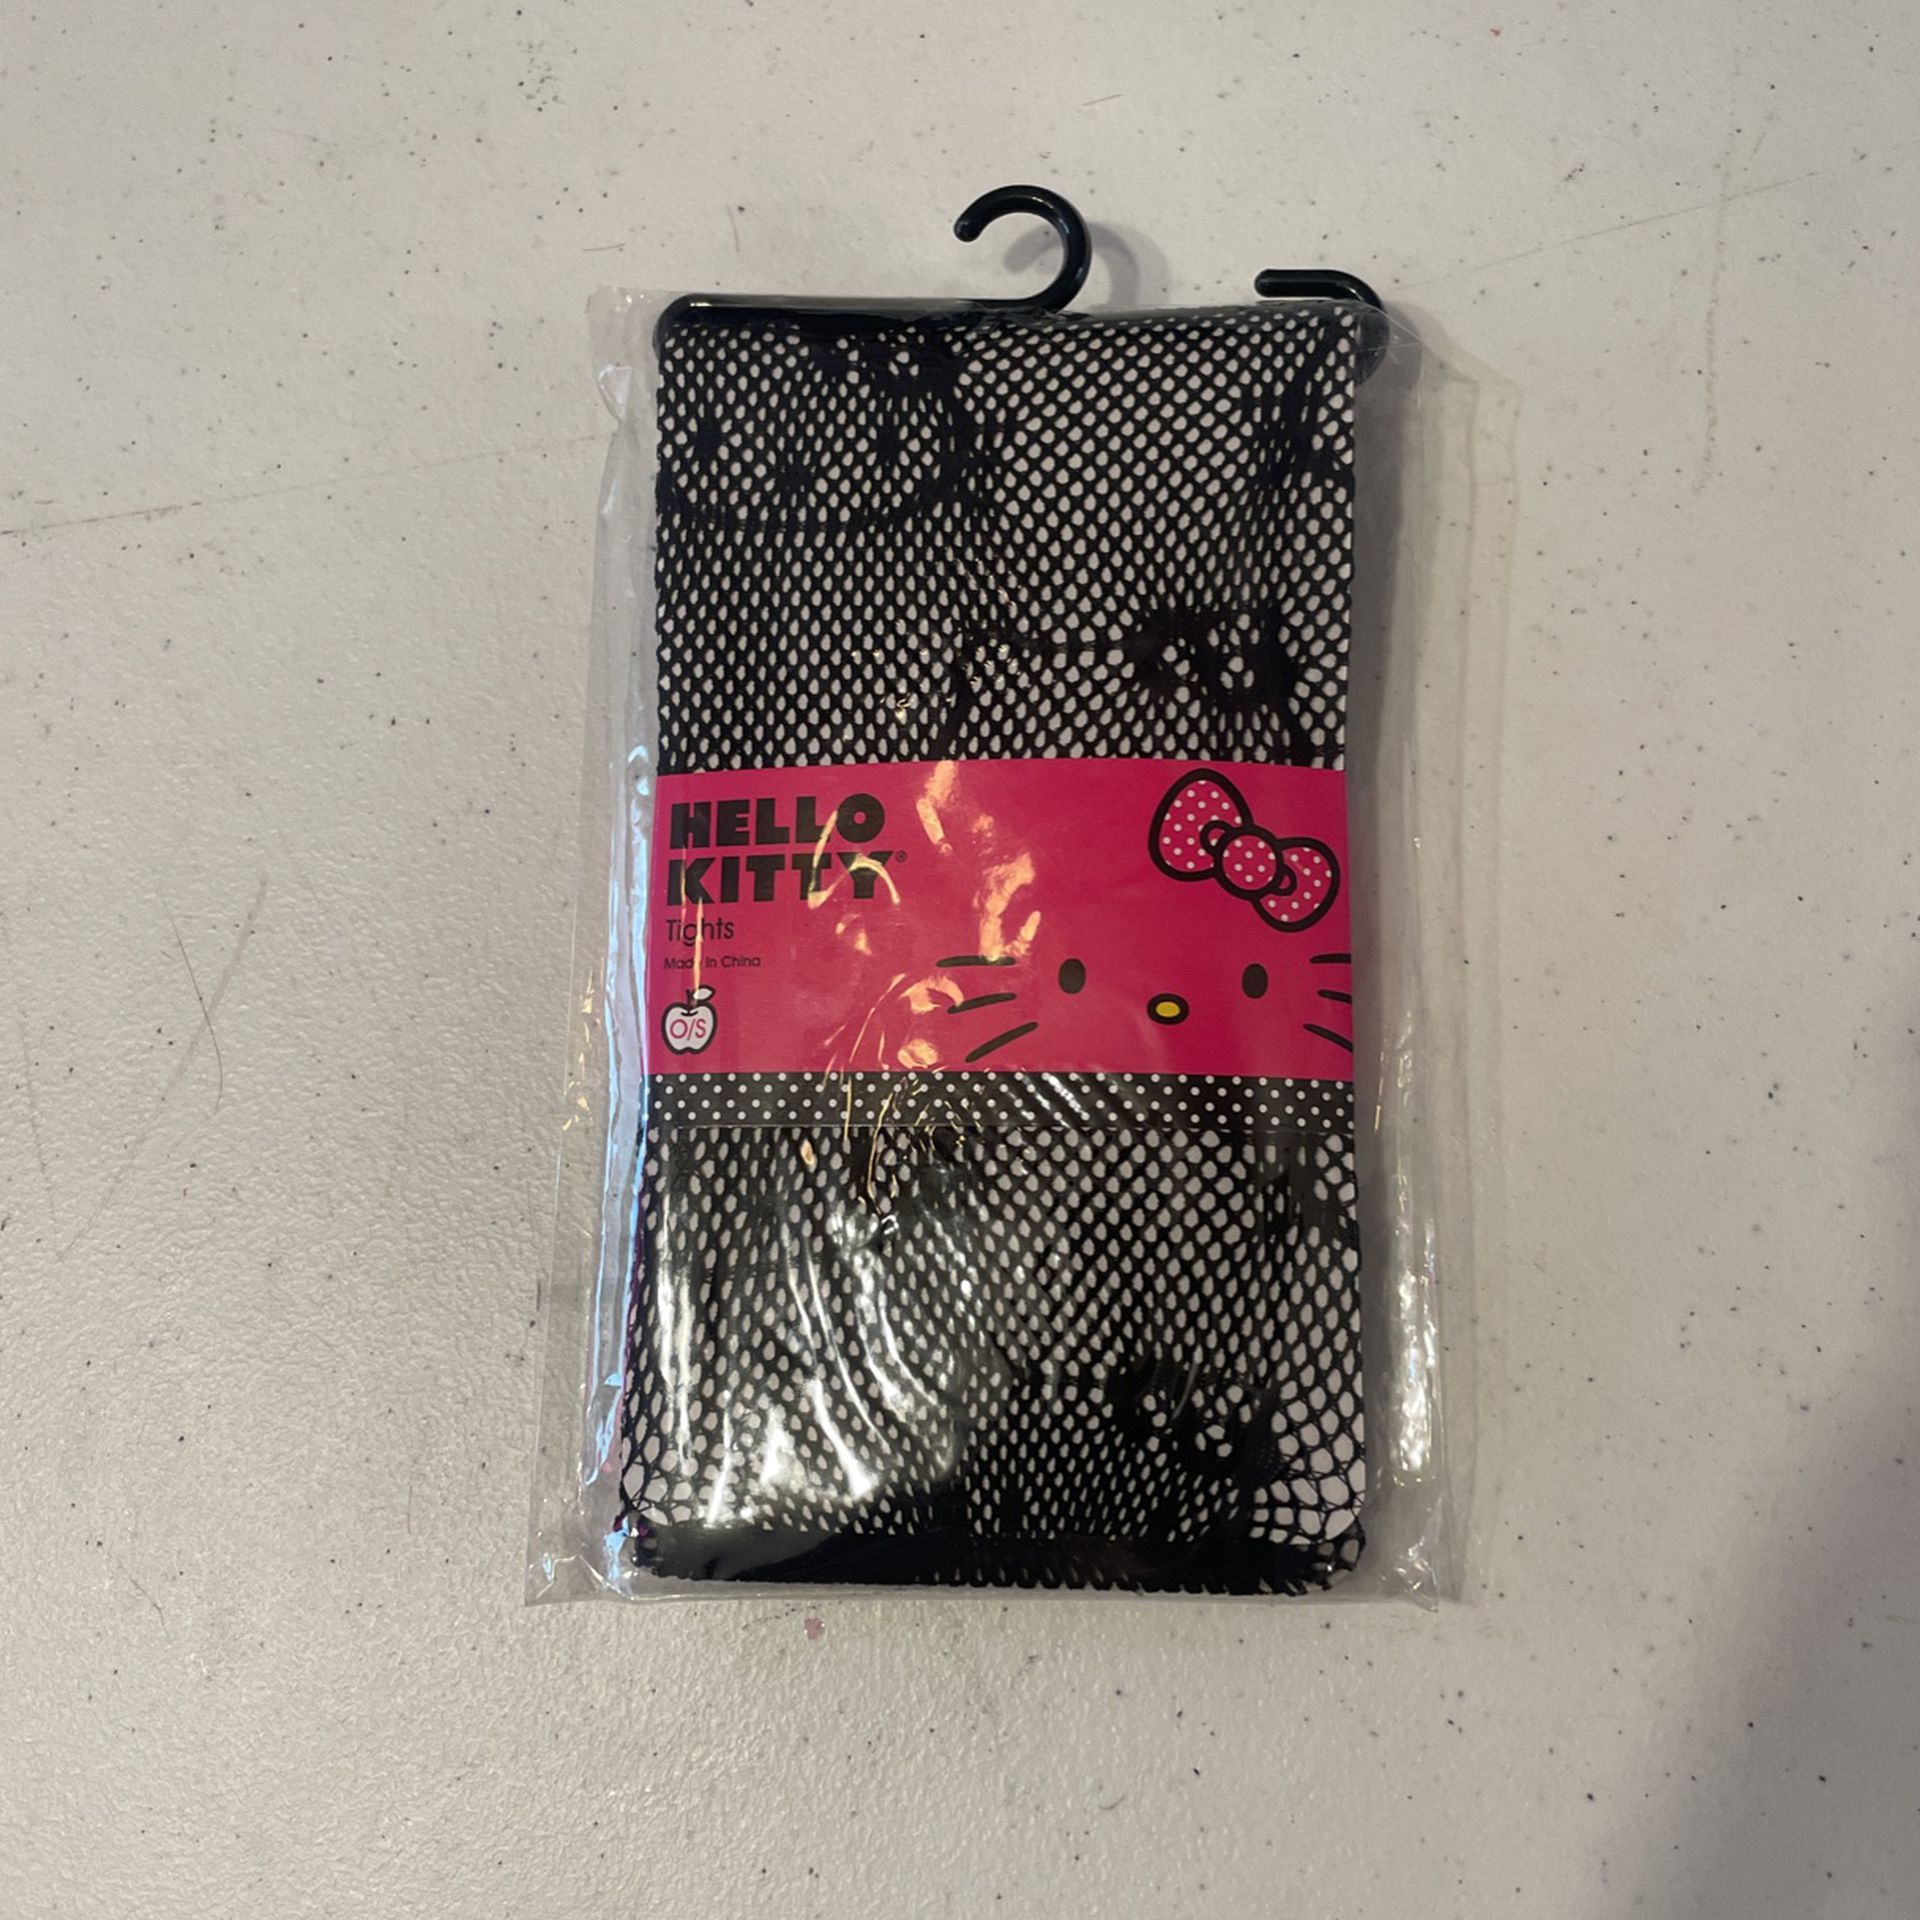 Vintage Hello Kitty Black Fishnet Stockings Tights Pantyhose. Petite Size: O/S XS-Small NEW!! Still In Package!